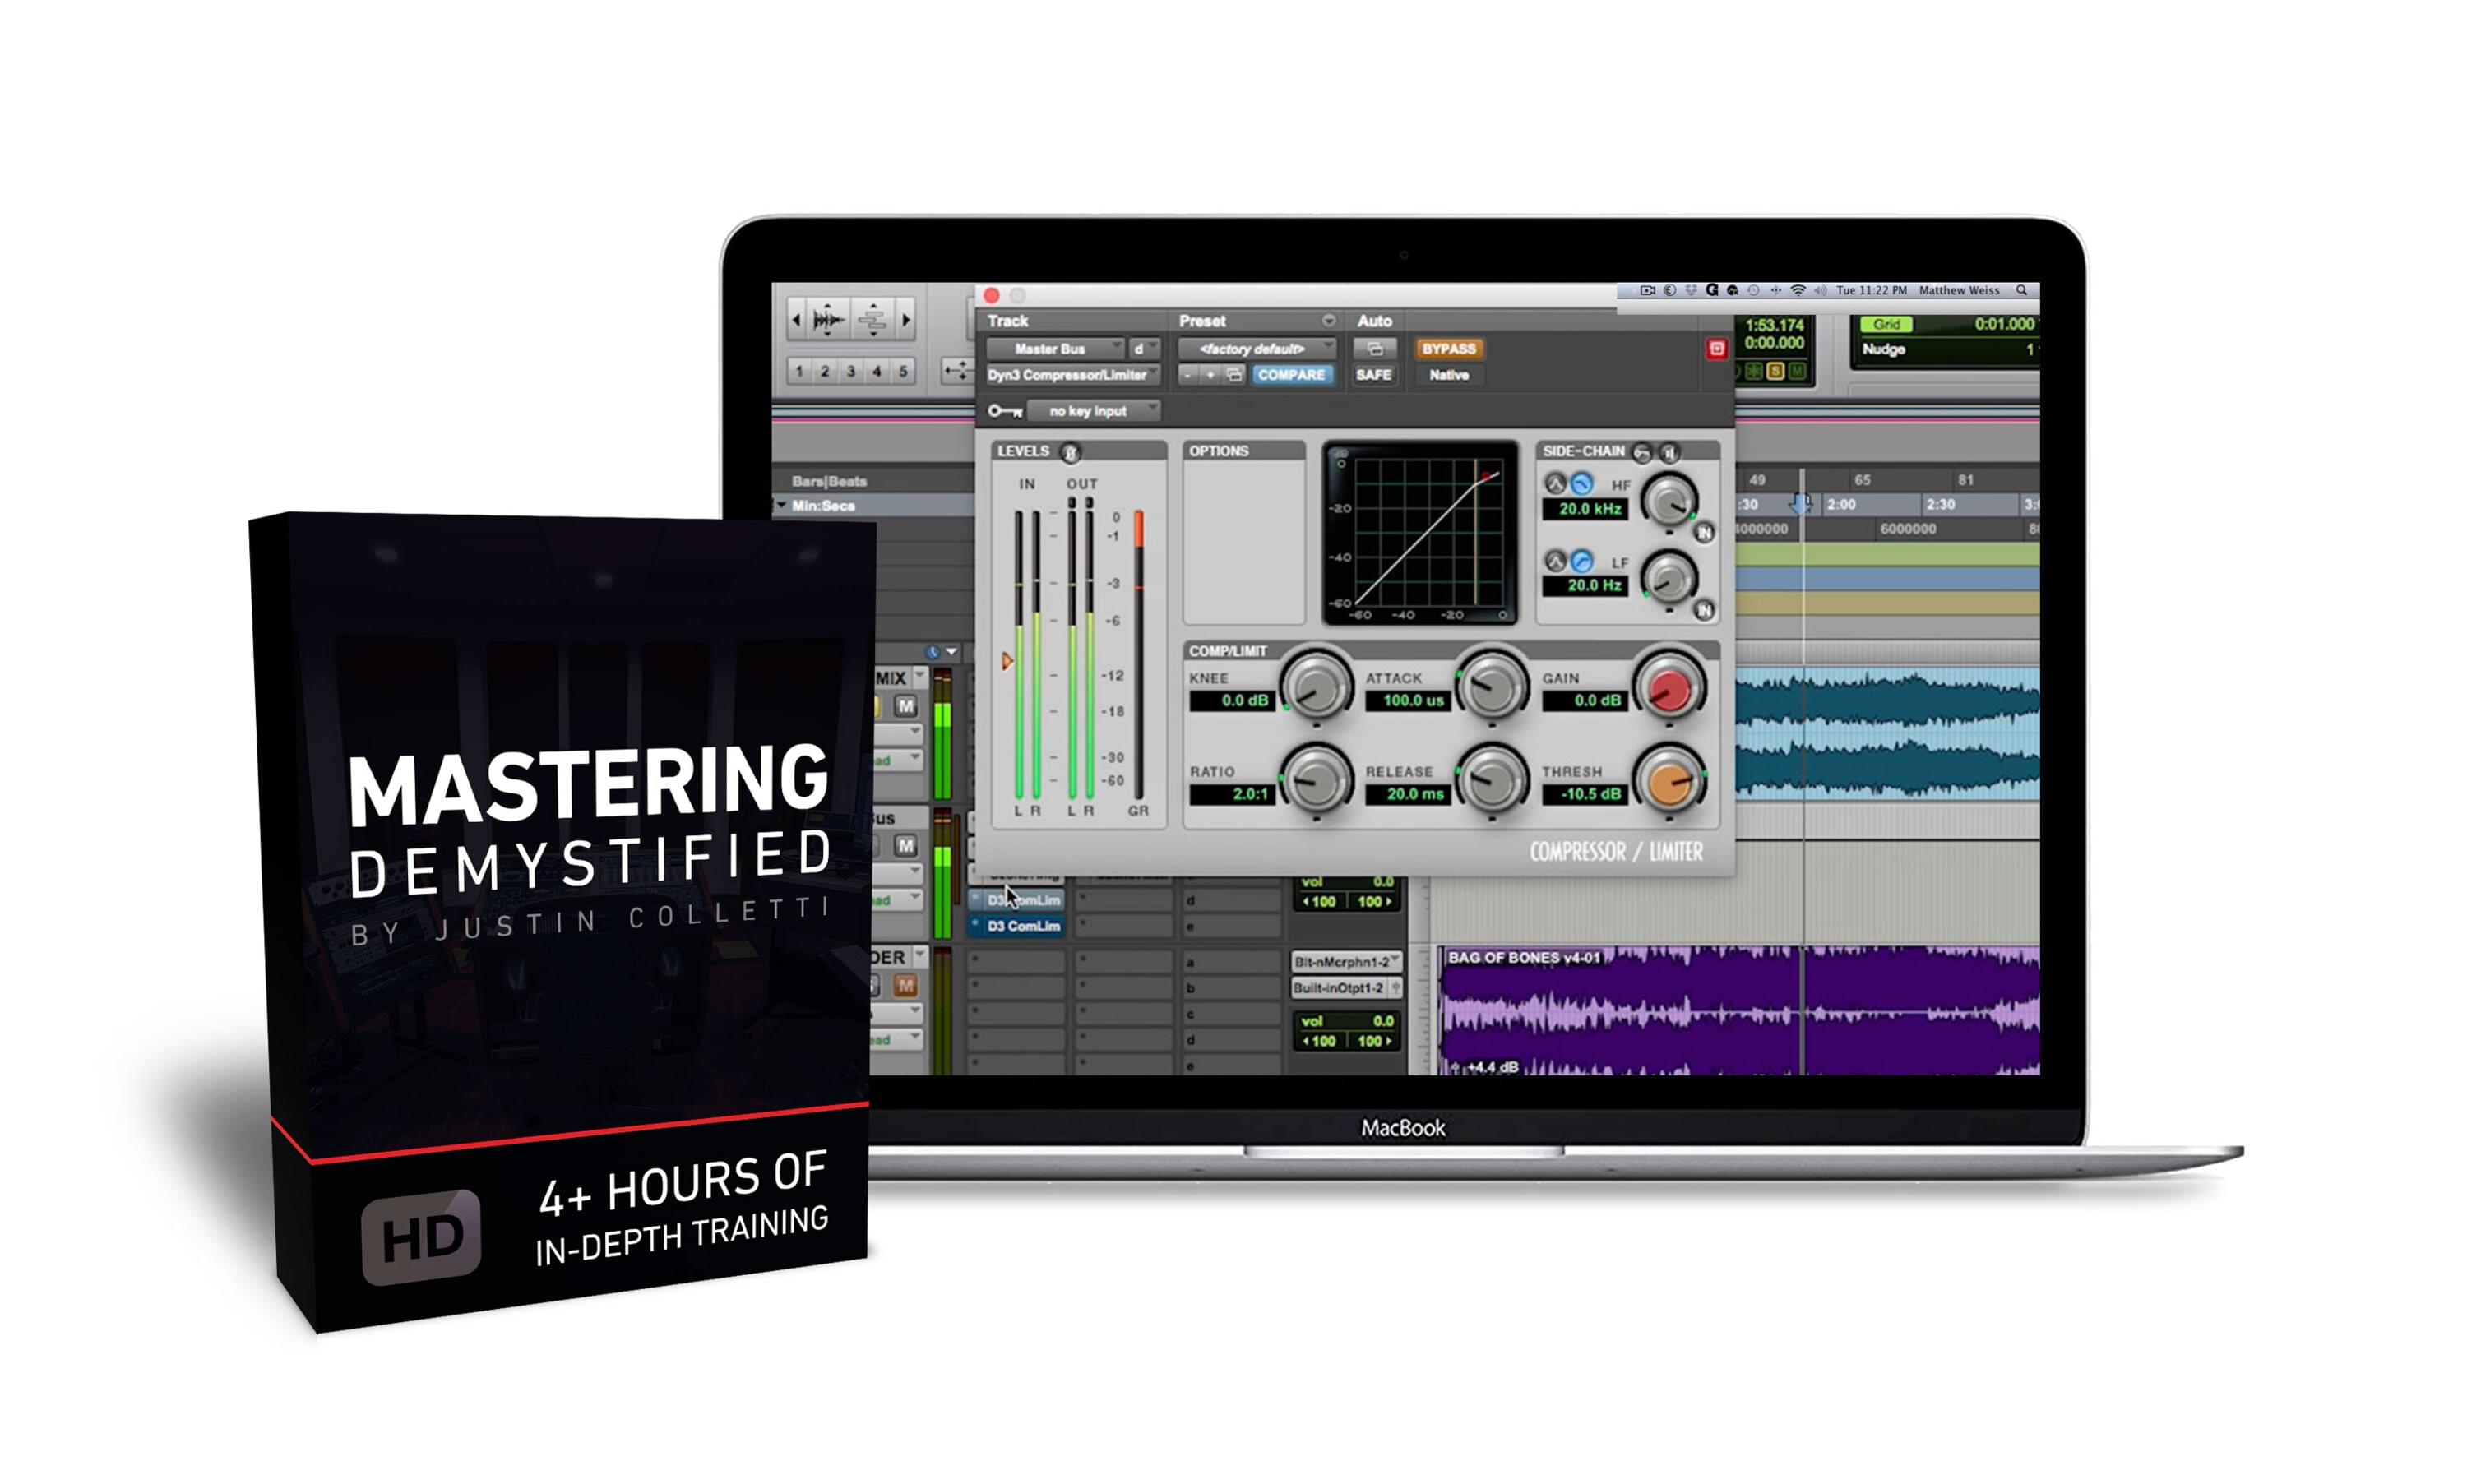 Mastering Demystified product box and screenshot